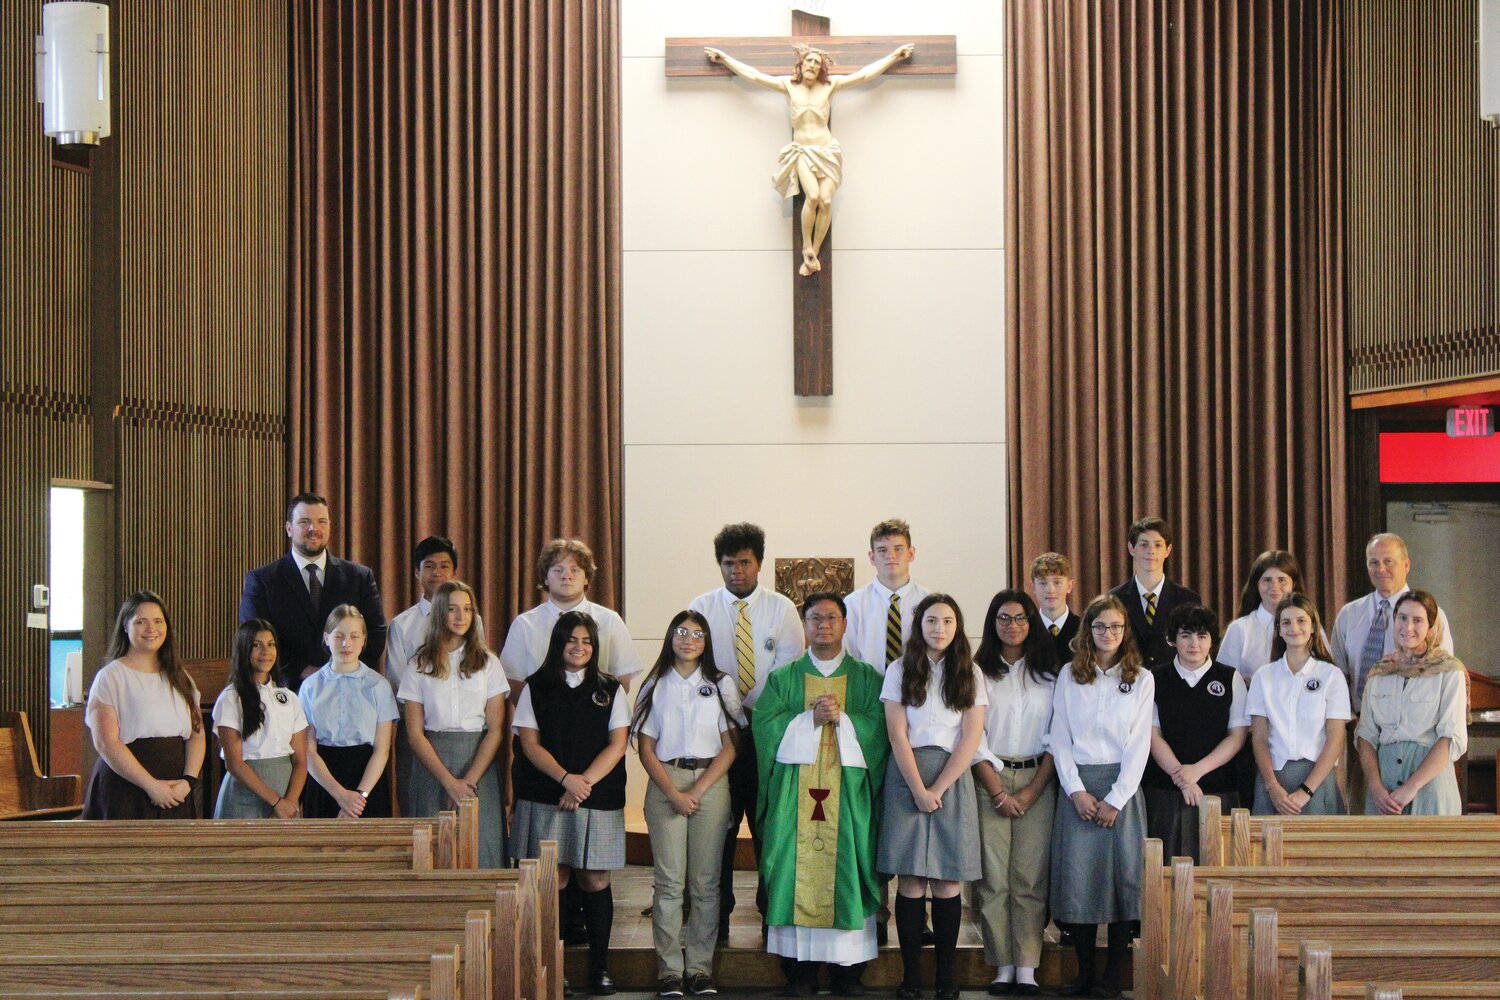 On Tuesday, Sept. 5, the Chesterton Academy - Our Lady of Hope in Warwick, the newest Catholic high school in the Diocese of Providence, held its first day of classes, along with its first Mass.